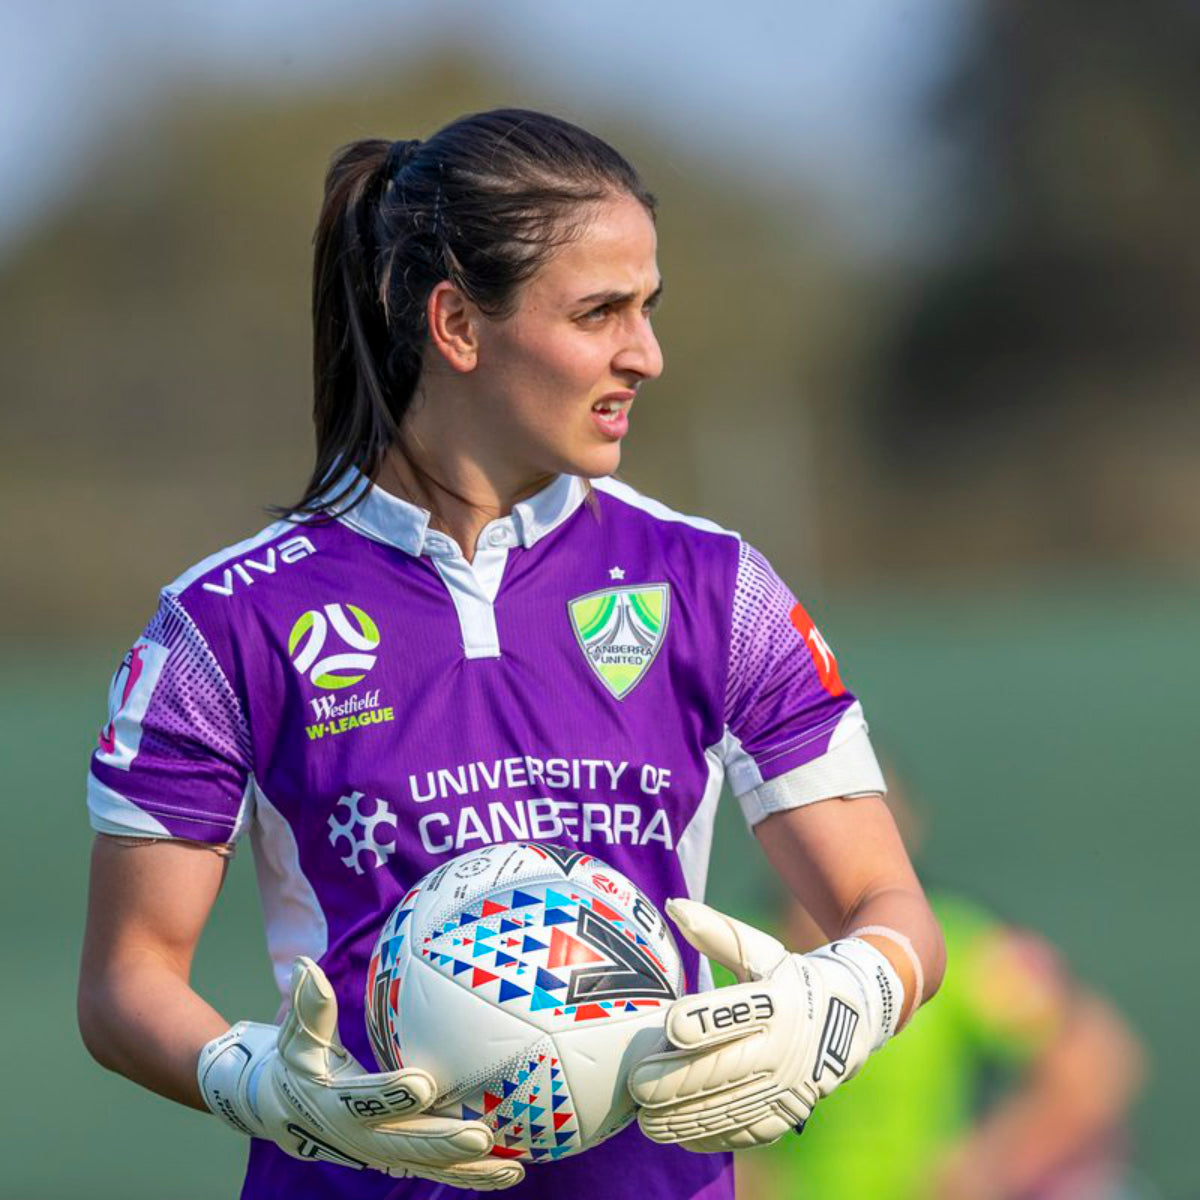 Canberra United goalkeeper with the ball in her hands with tTee3 Goalkeeper gloves during a match